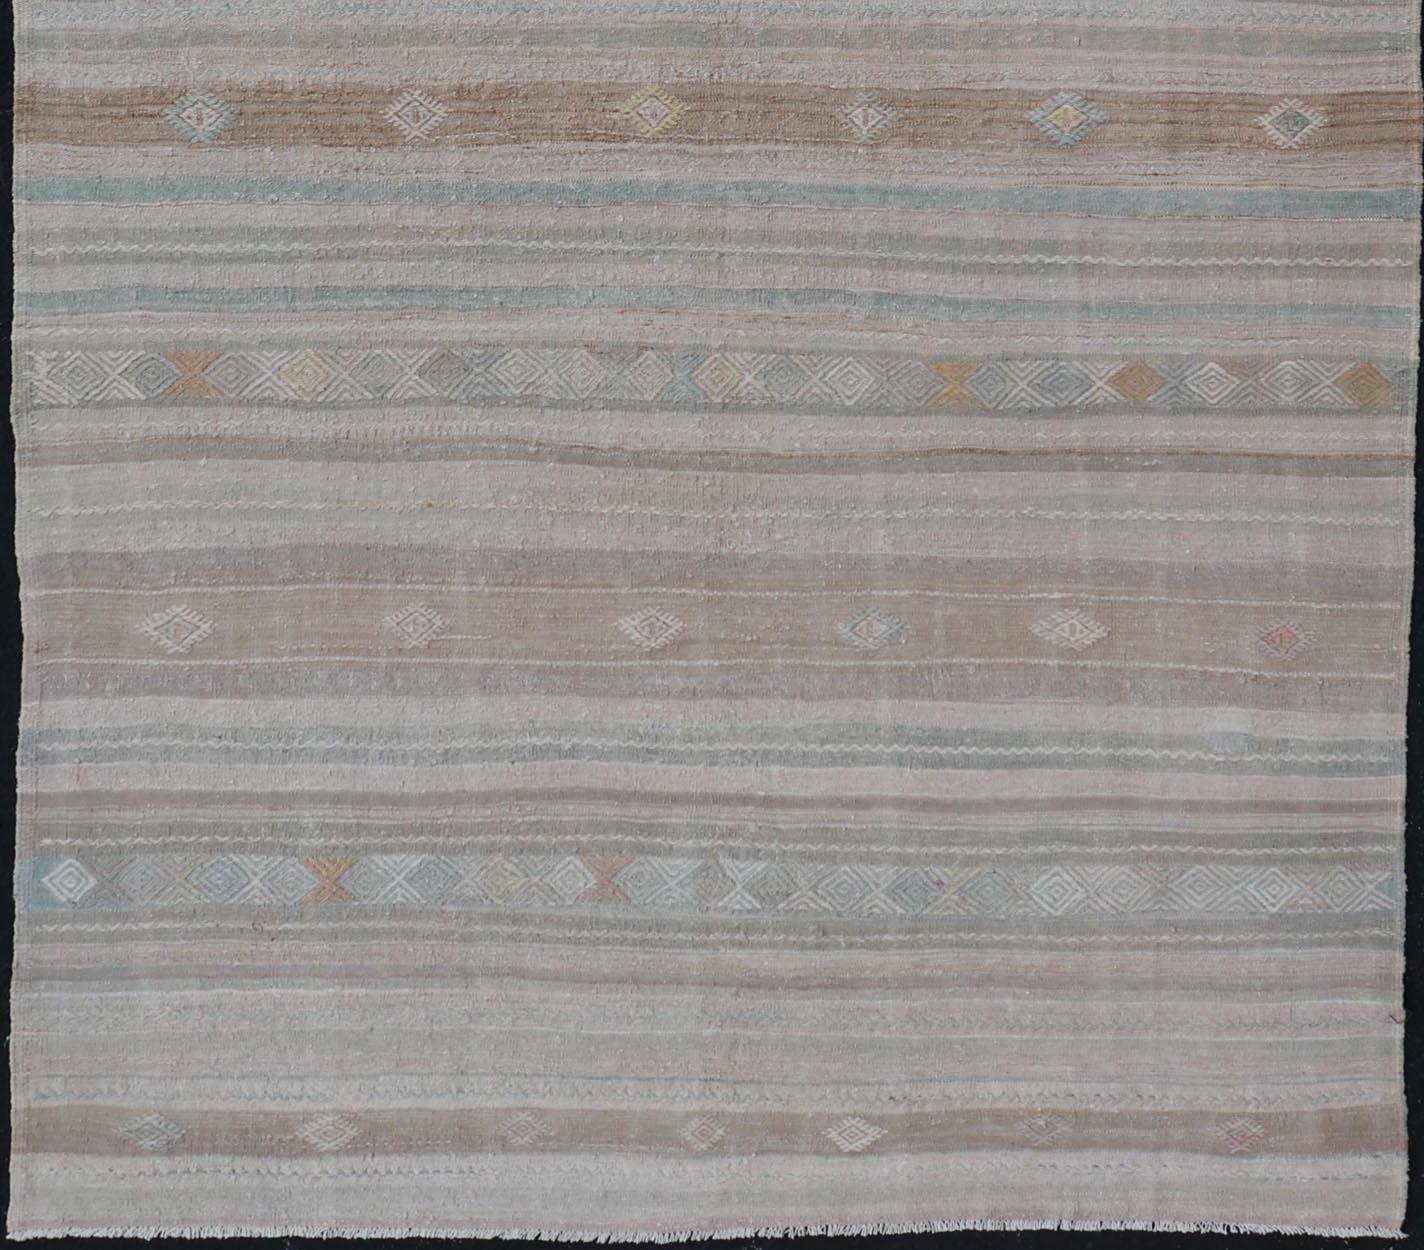 Vintage flat-weave Kilim with embroideries in tan, light green, and grey with a modern design.
geometric stripe design Vintage Kilim from Turkey, Keivan Woven Arts / rug EN-13981, country of origin / type: Turkey / Kilim, circa 1950

Measures: